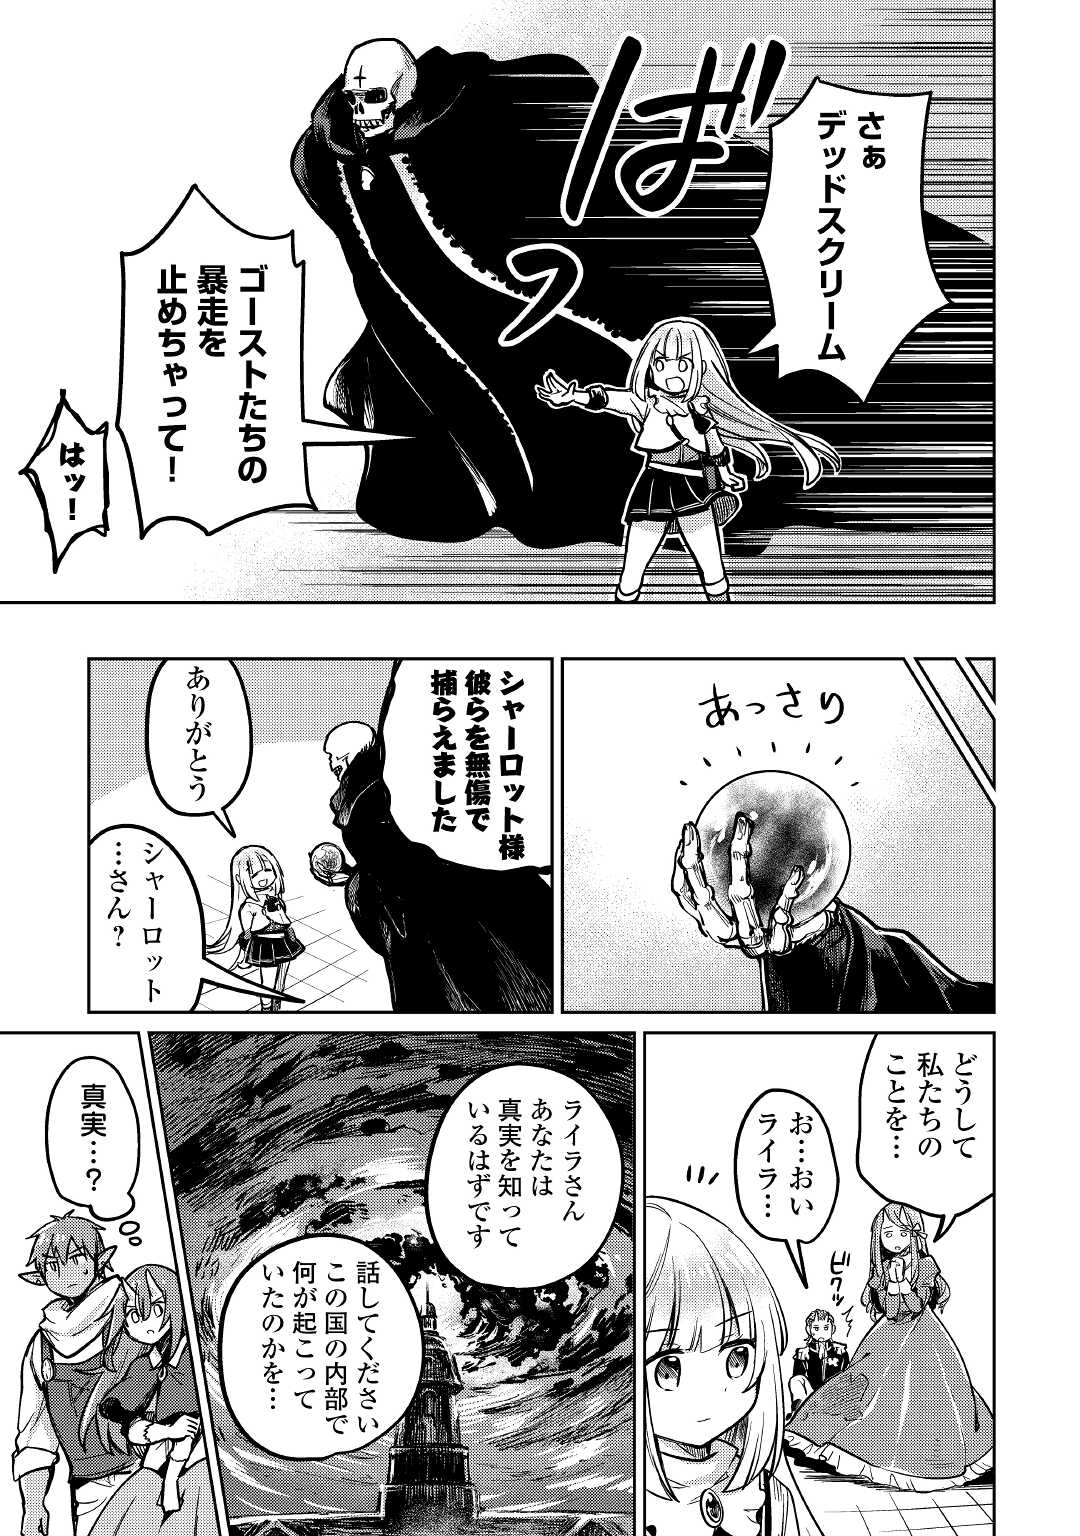 The Former Structural Researcher’s Story of Otherworldly Adventure 第40話 - Page 11